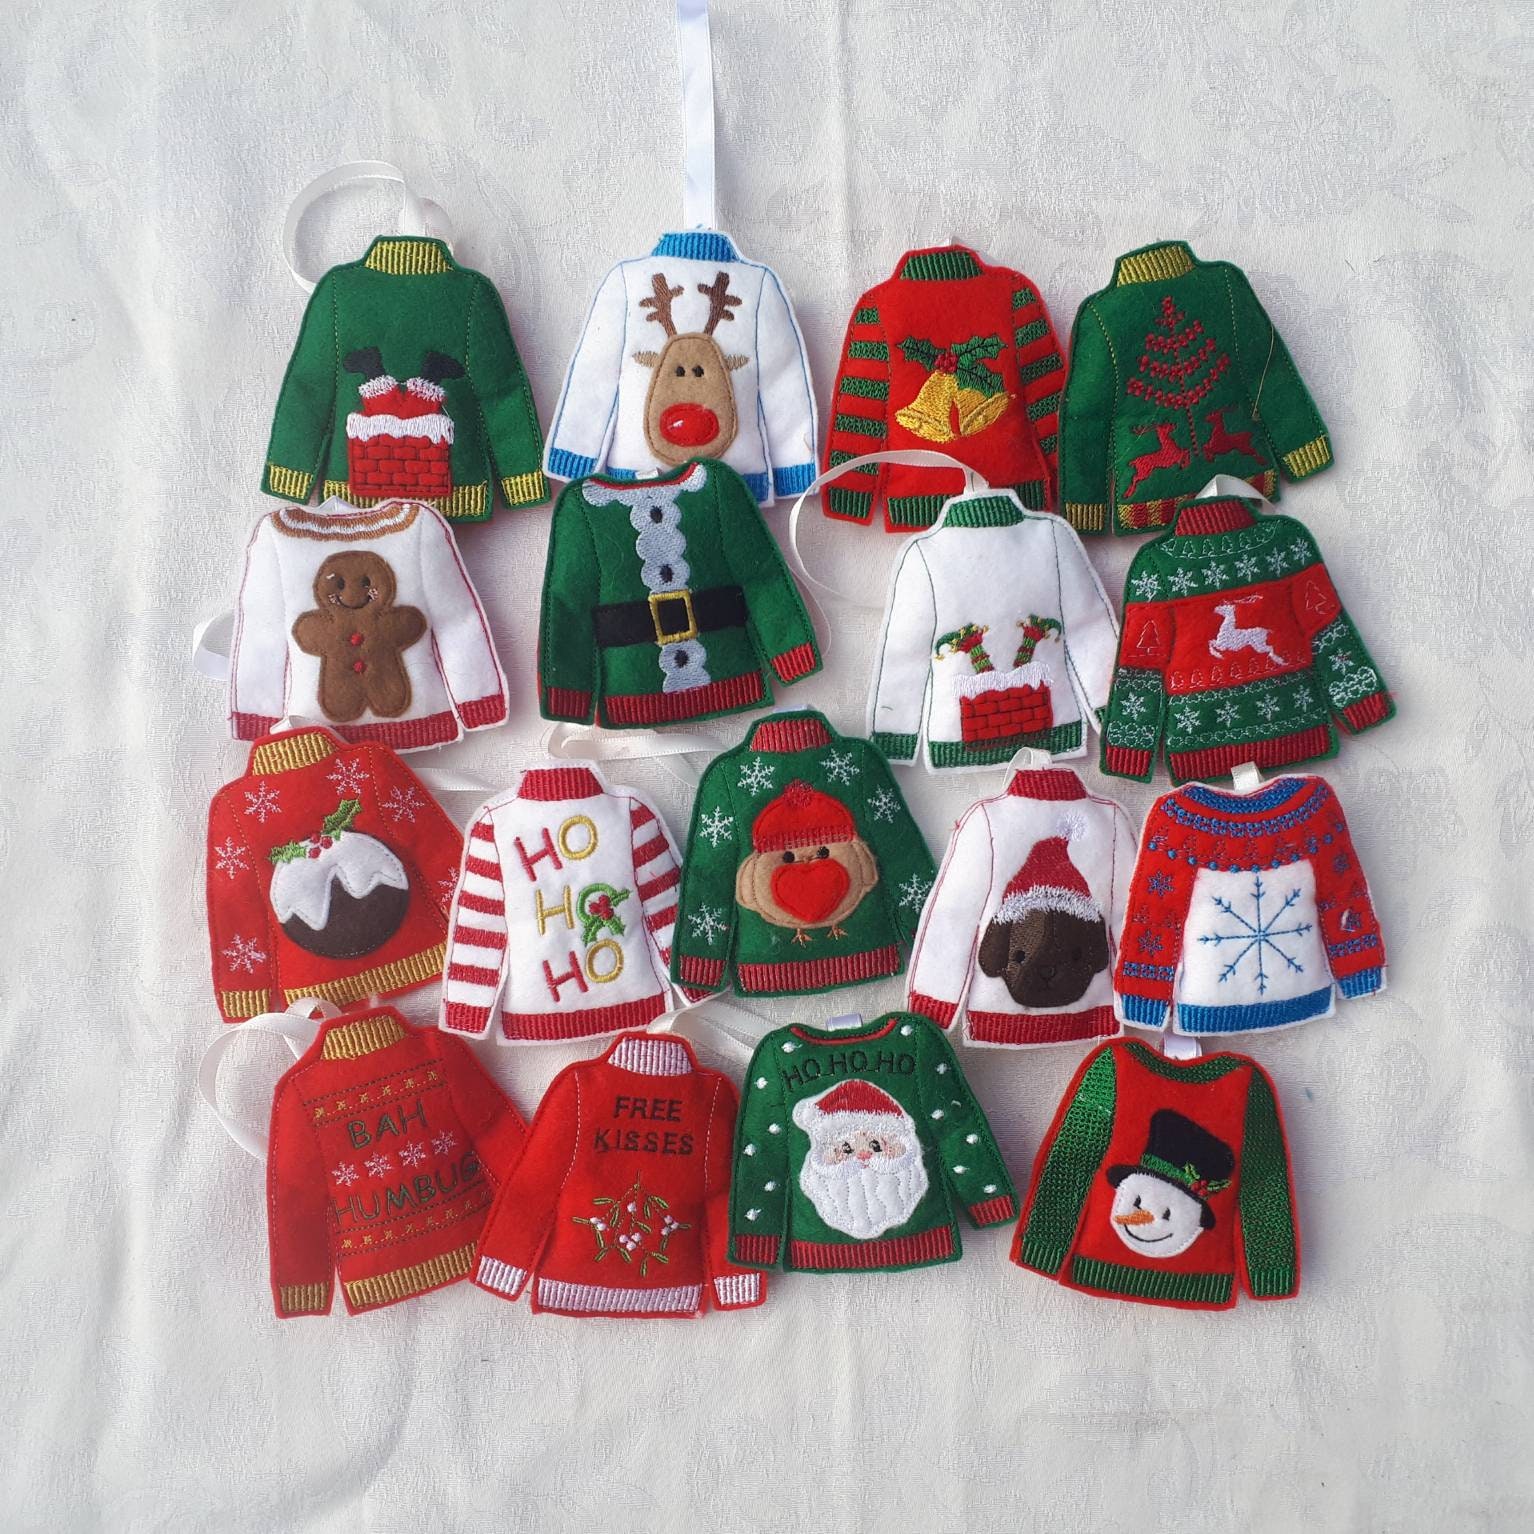 Make Your Christmas Moparific With Ugly Sweaters, Tree Baubles